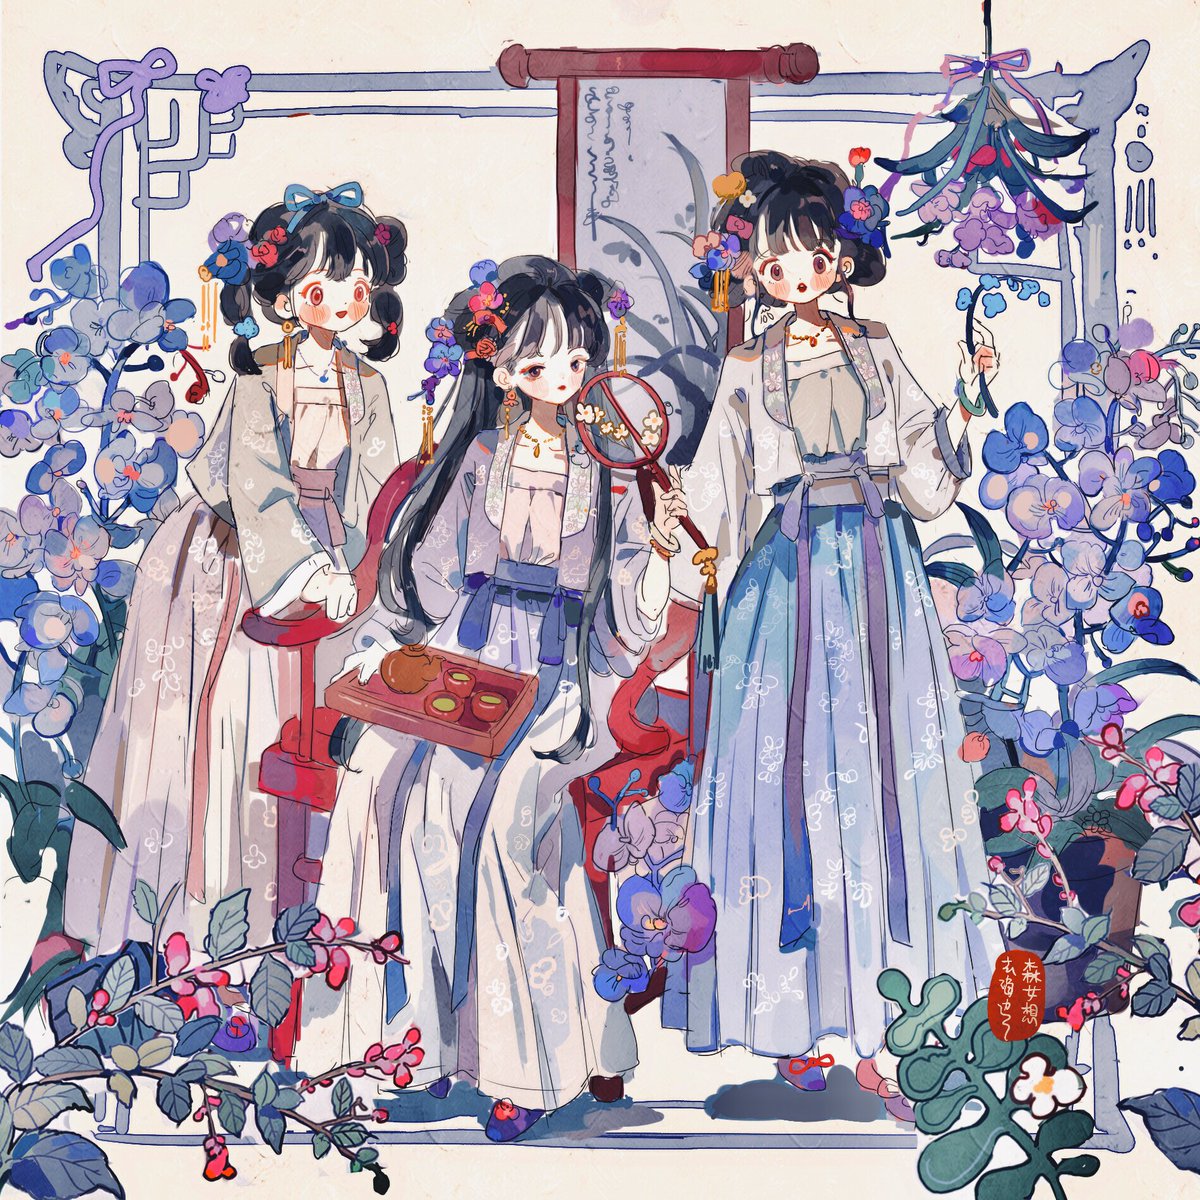 「Chinese traditional clothes(((o(*゜▽゜*)o)」|抖抖のイラスト